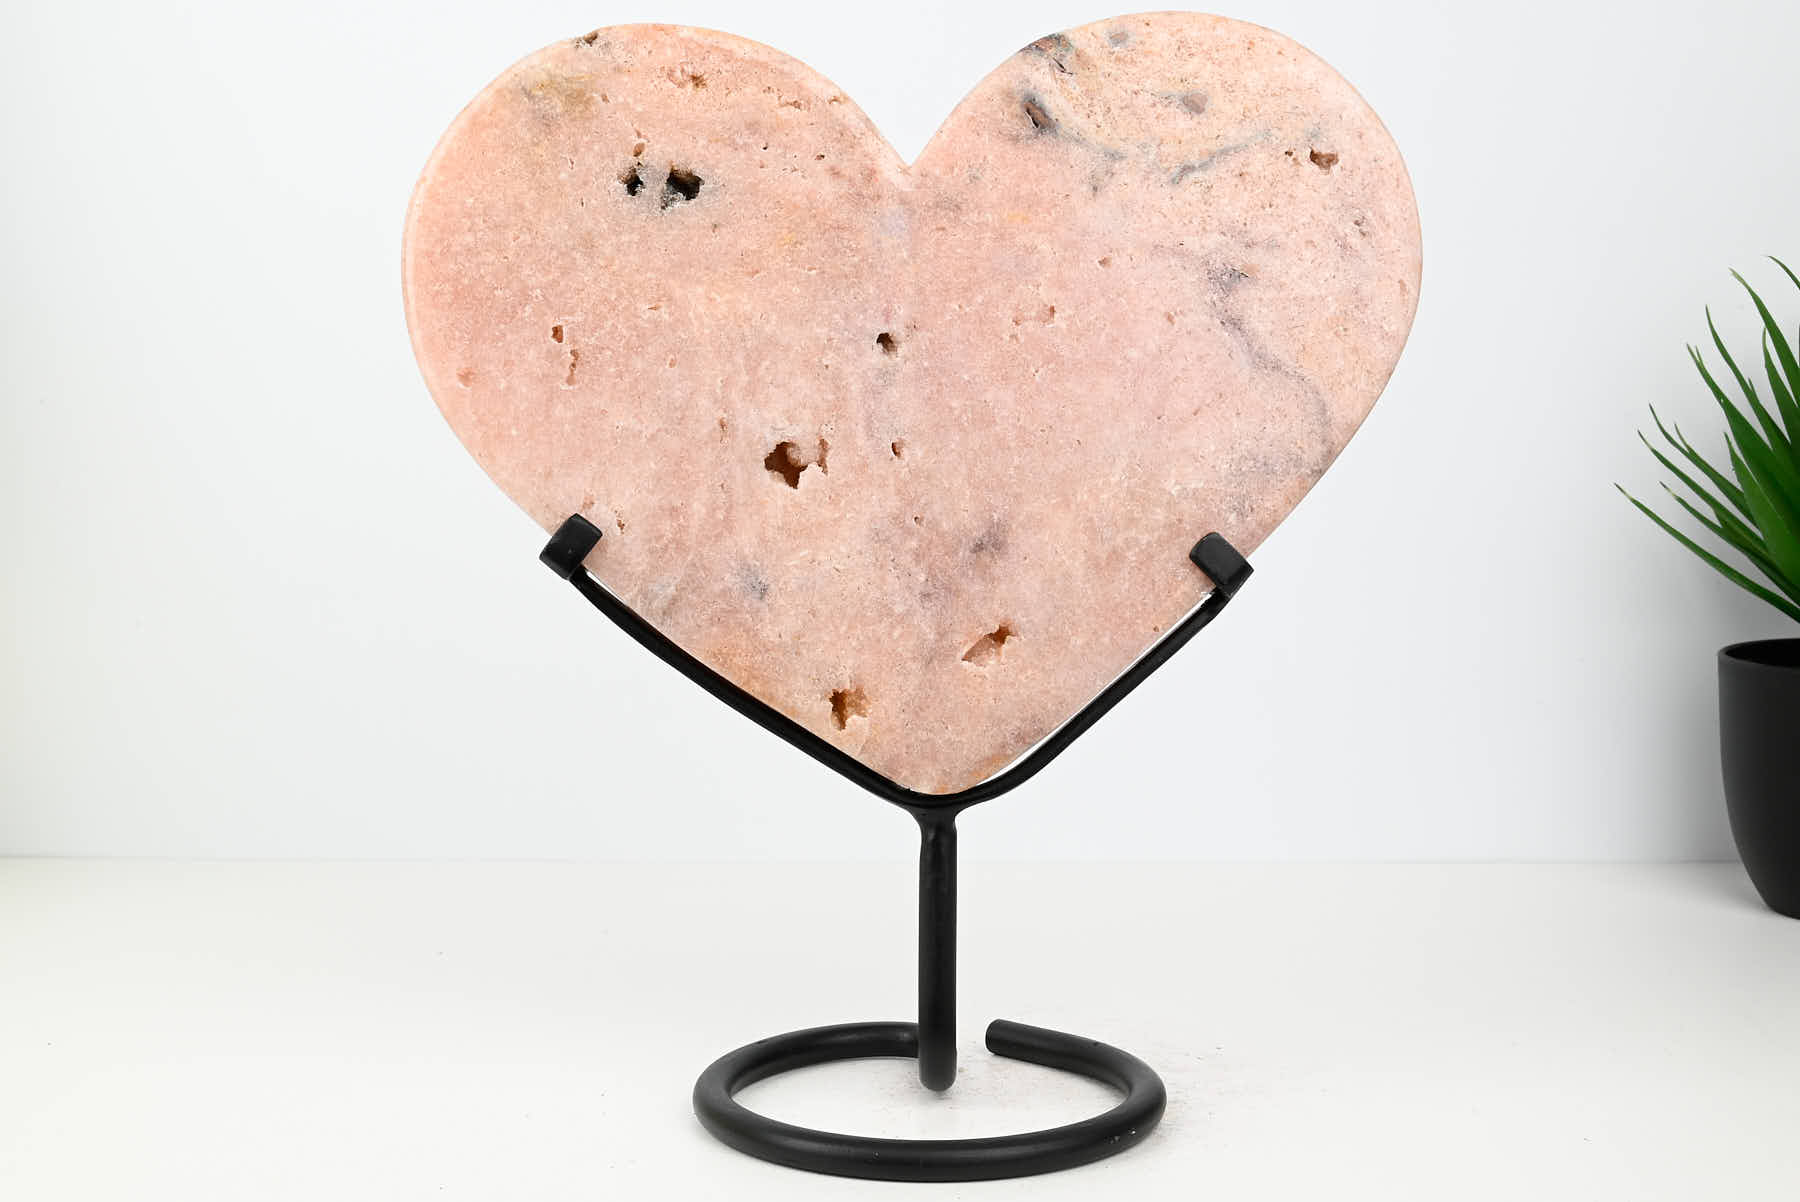 Extra Quality Pink Amethyst Heart - 2.81kg, 27cm high - #HTPINK-34022